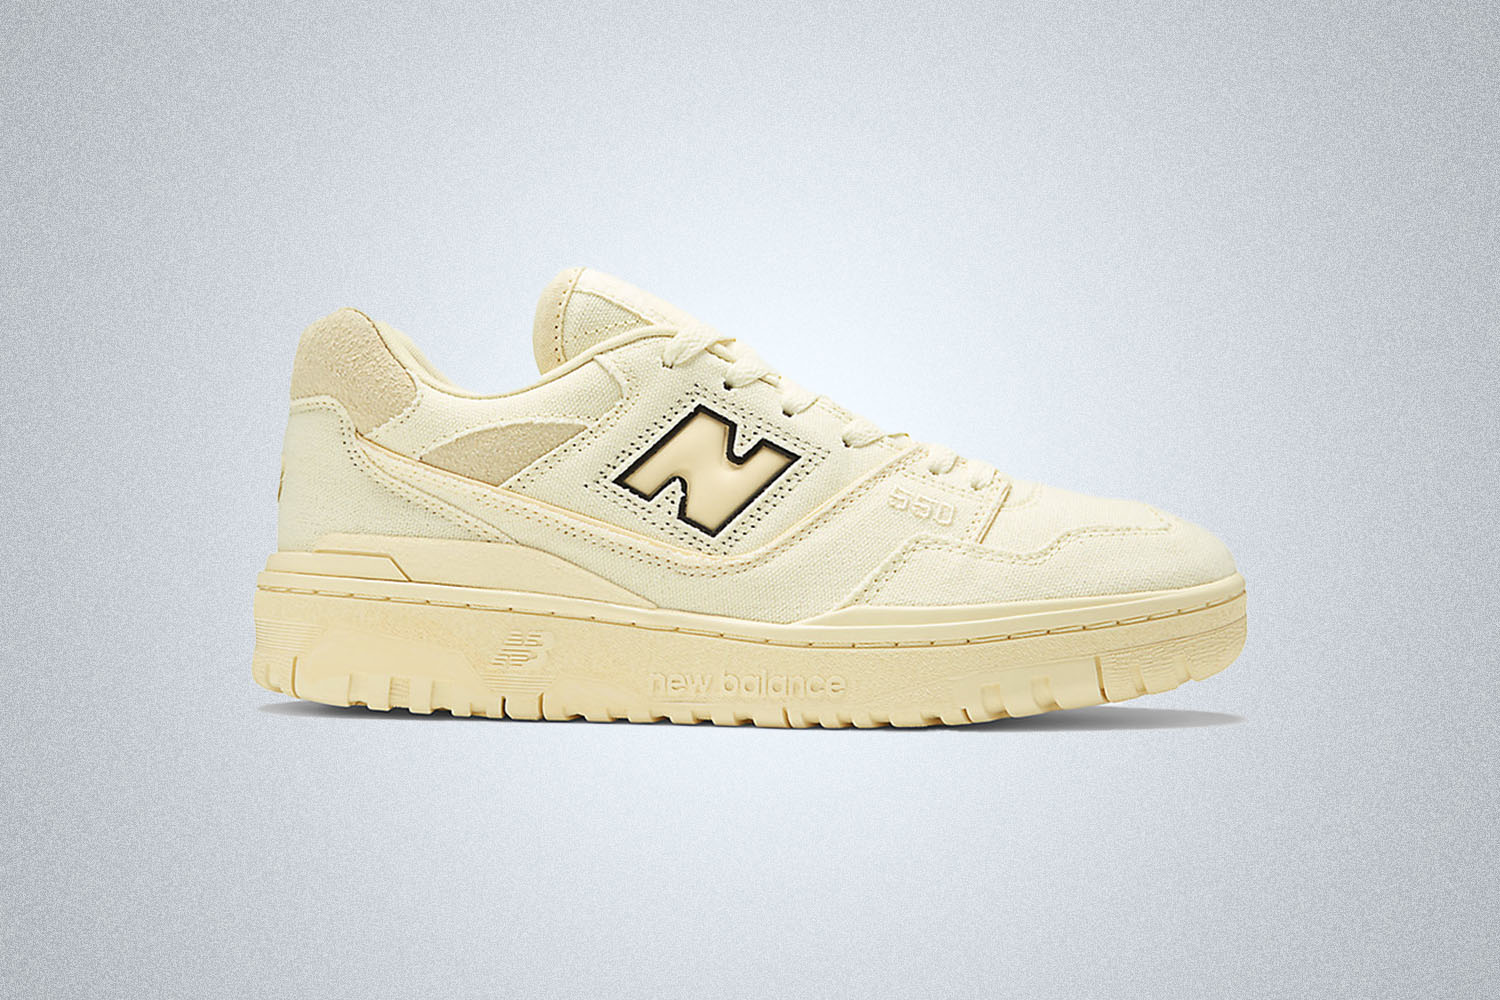 An off white New balance 550 sneaker on a grey background